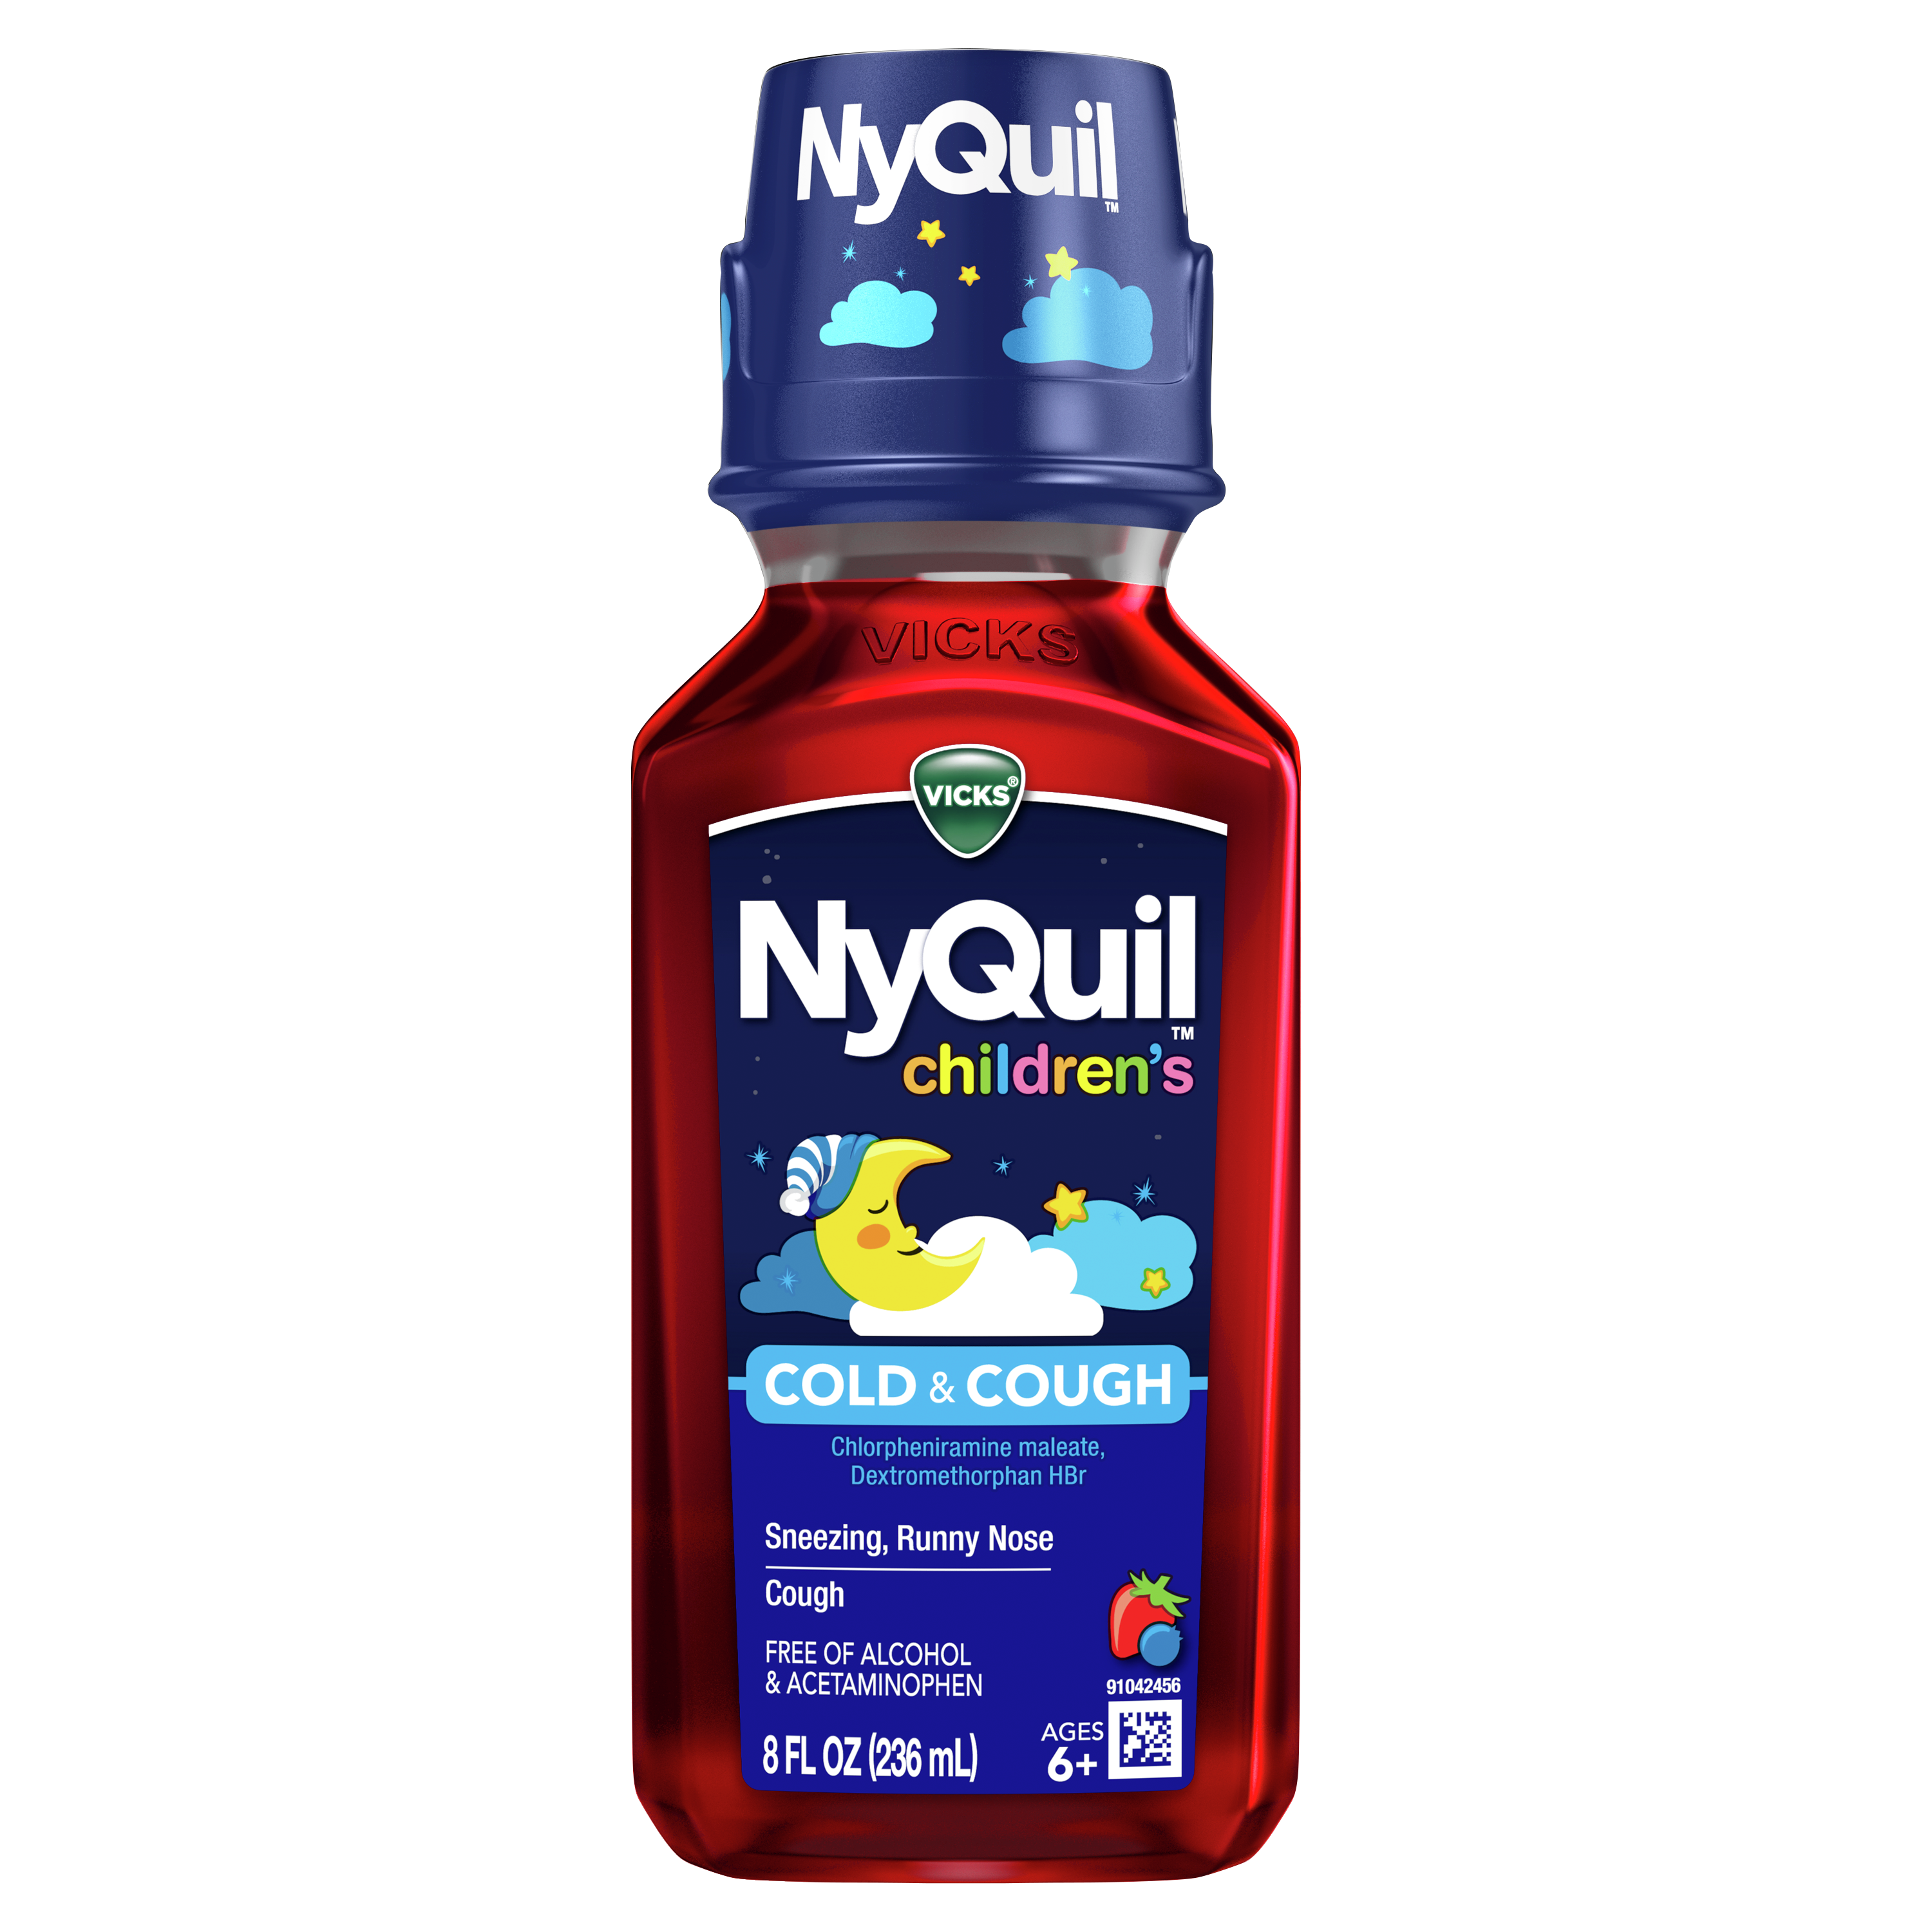 Children's NyQuil Cold & Cough Medicine